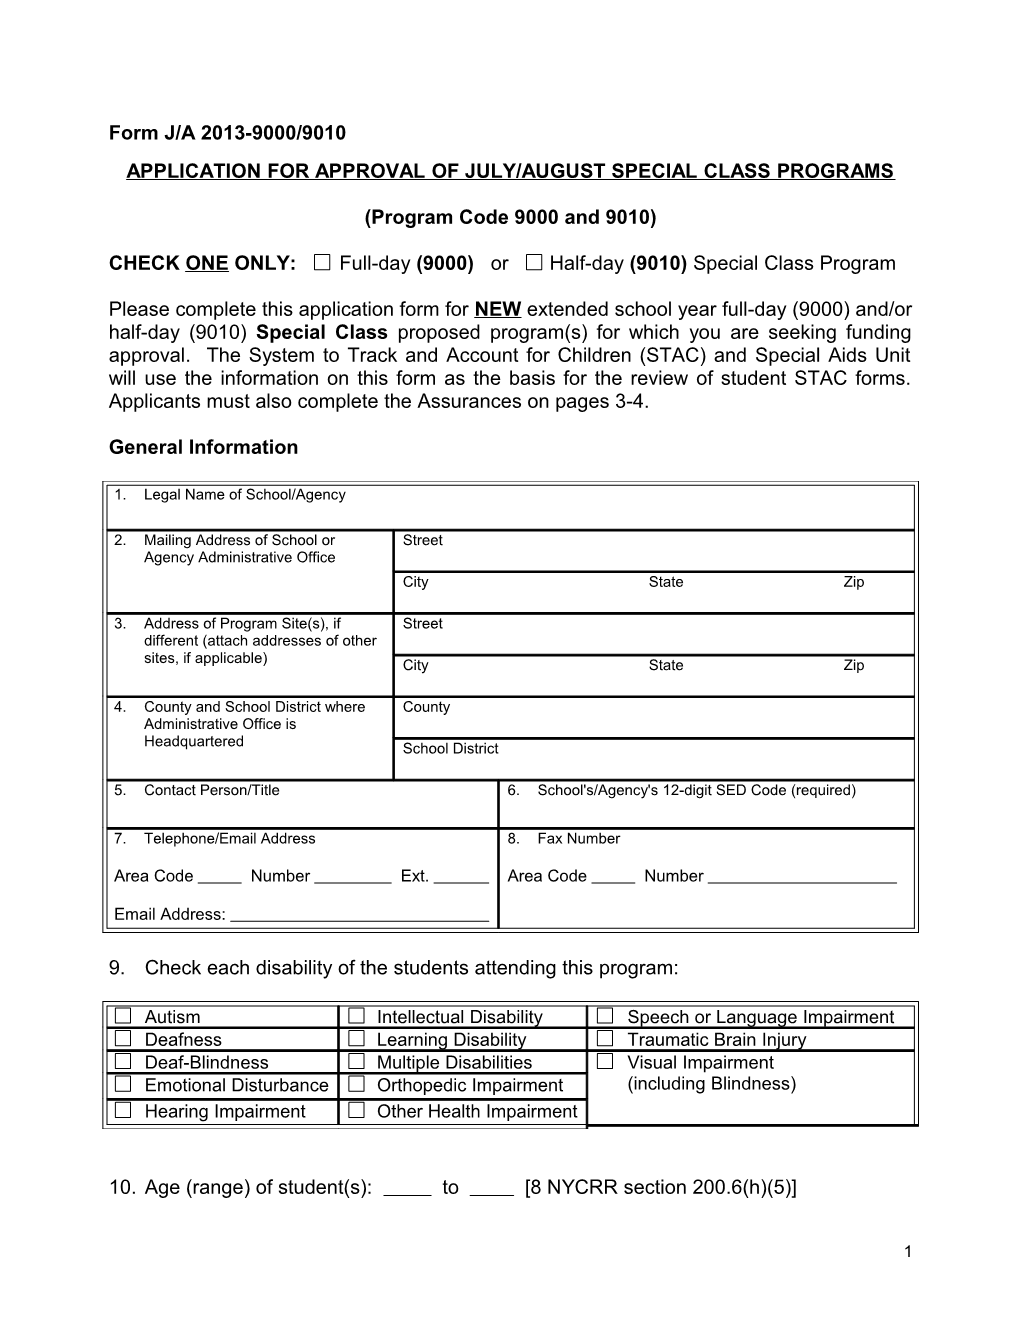 Application for Approval of July/August Special Class Programs